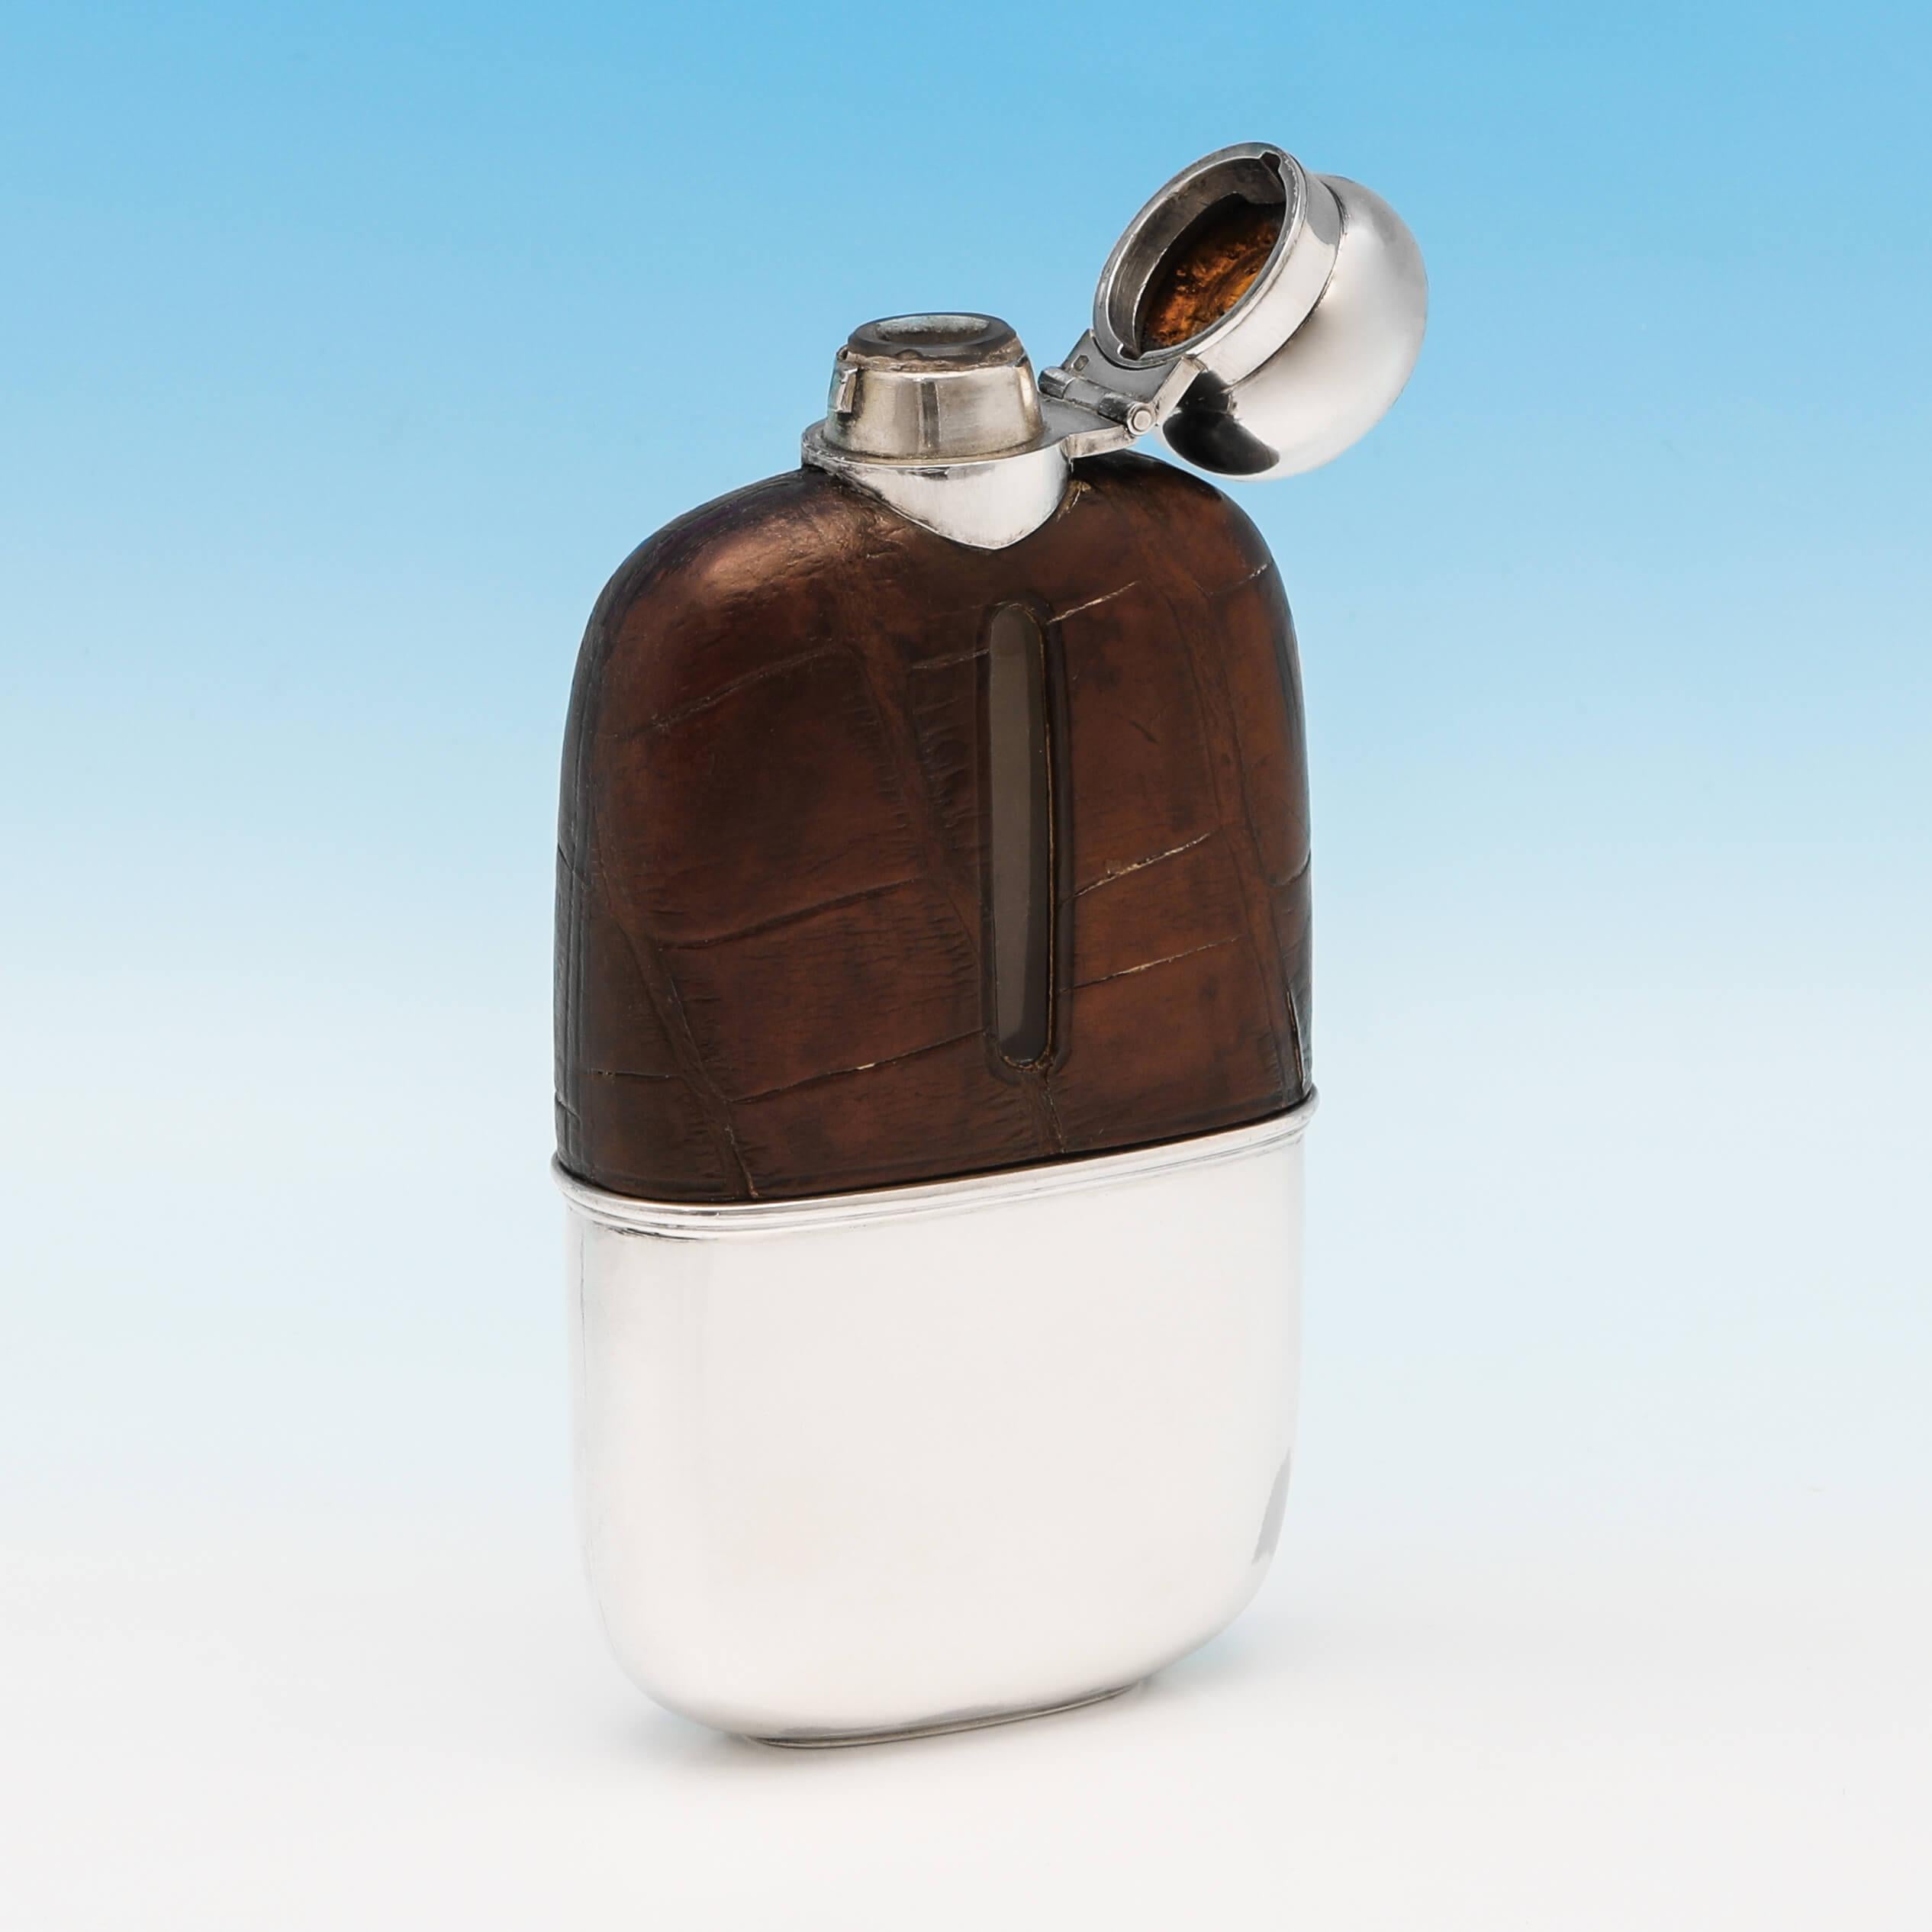 Hallmarked in Sheffield in 1931 by G. & J. W. Hawksley Ltd., this handsome, sterling silver hip flask, features a crocodile leather bound upper body, a bayonet cap, and a removable silver cup. The hip flask measures 5.5